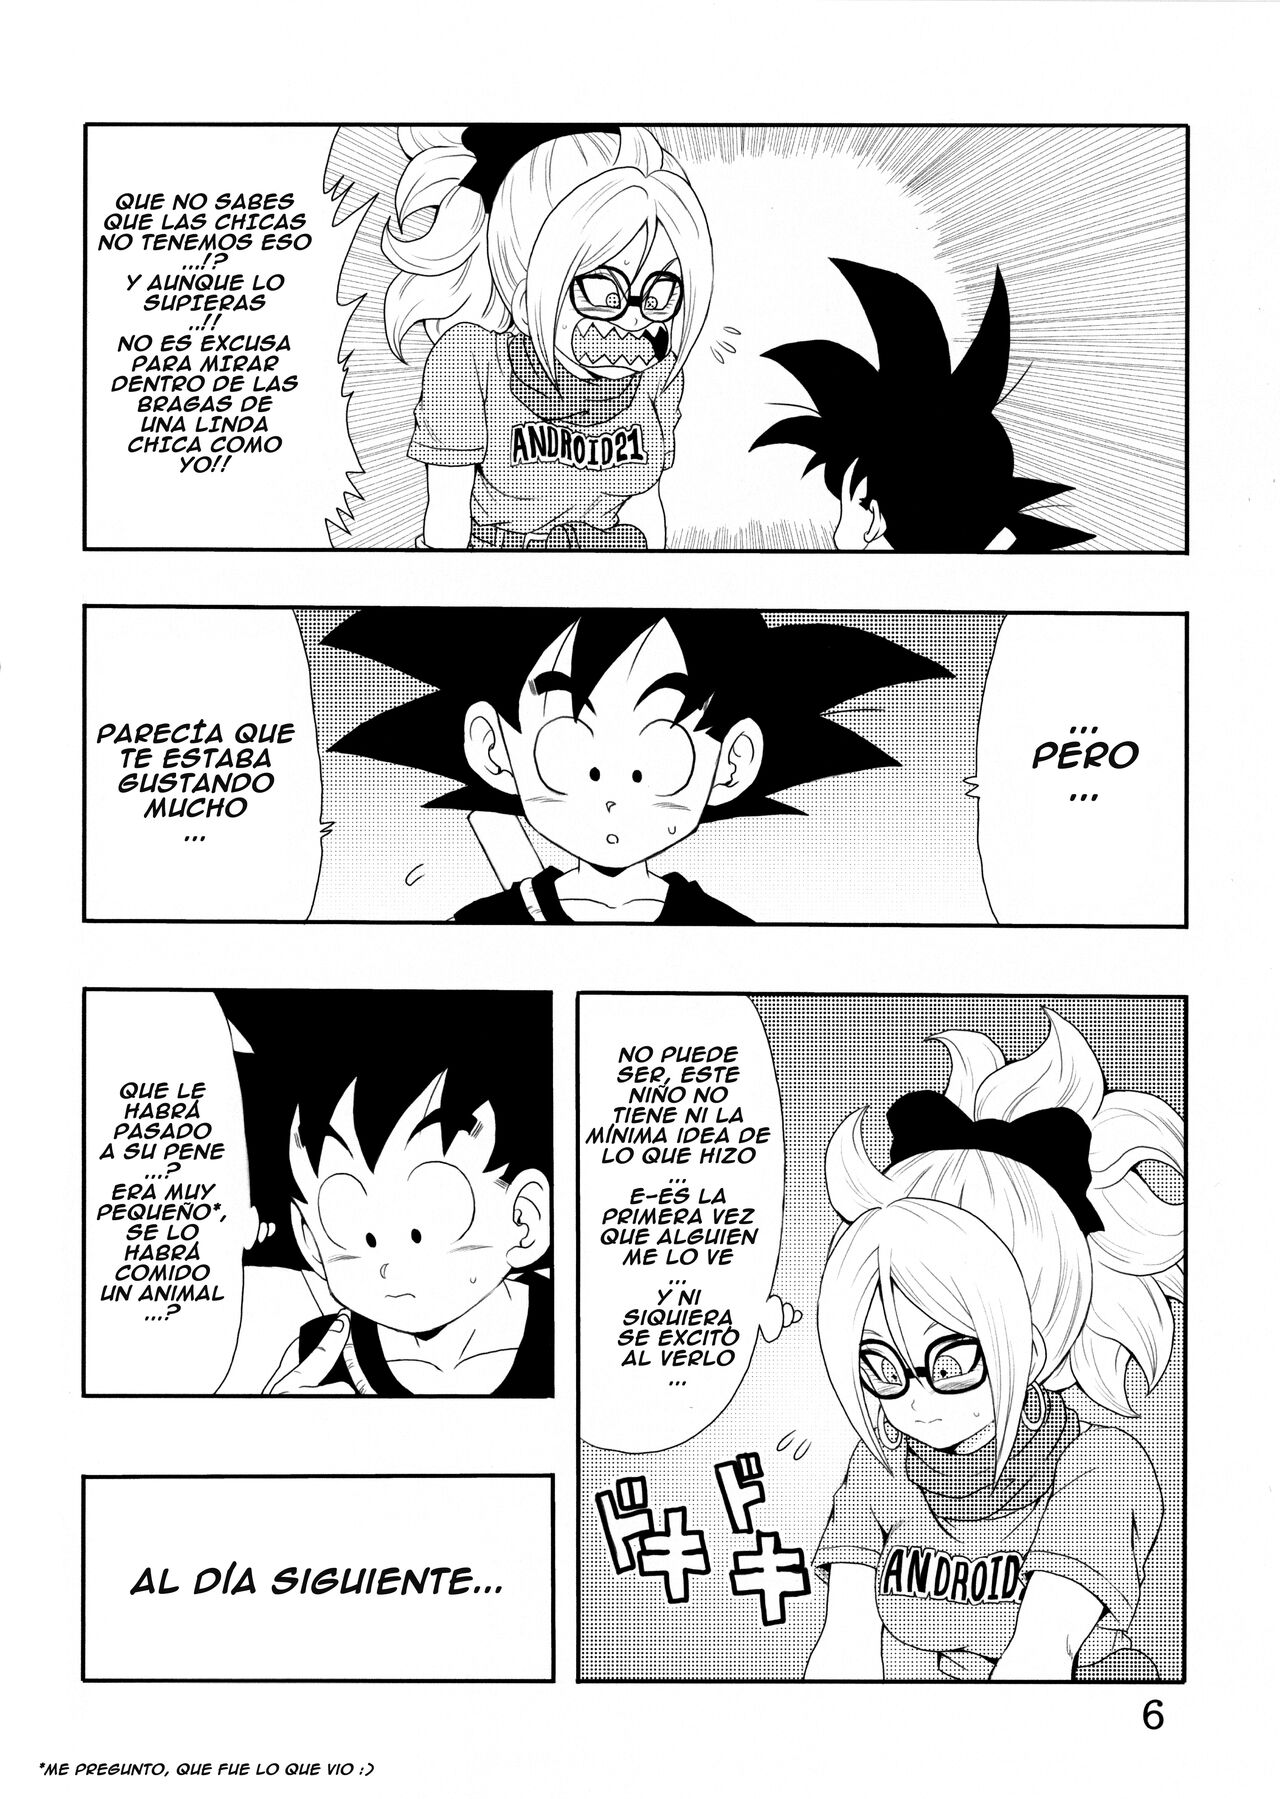 Episode of BULMA - ANDROID 21 Version